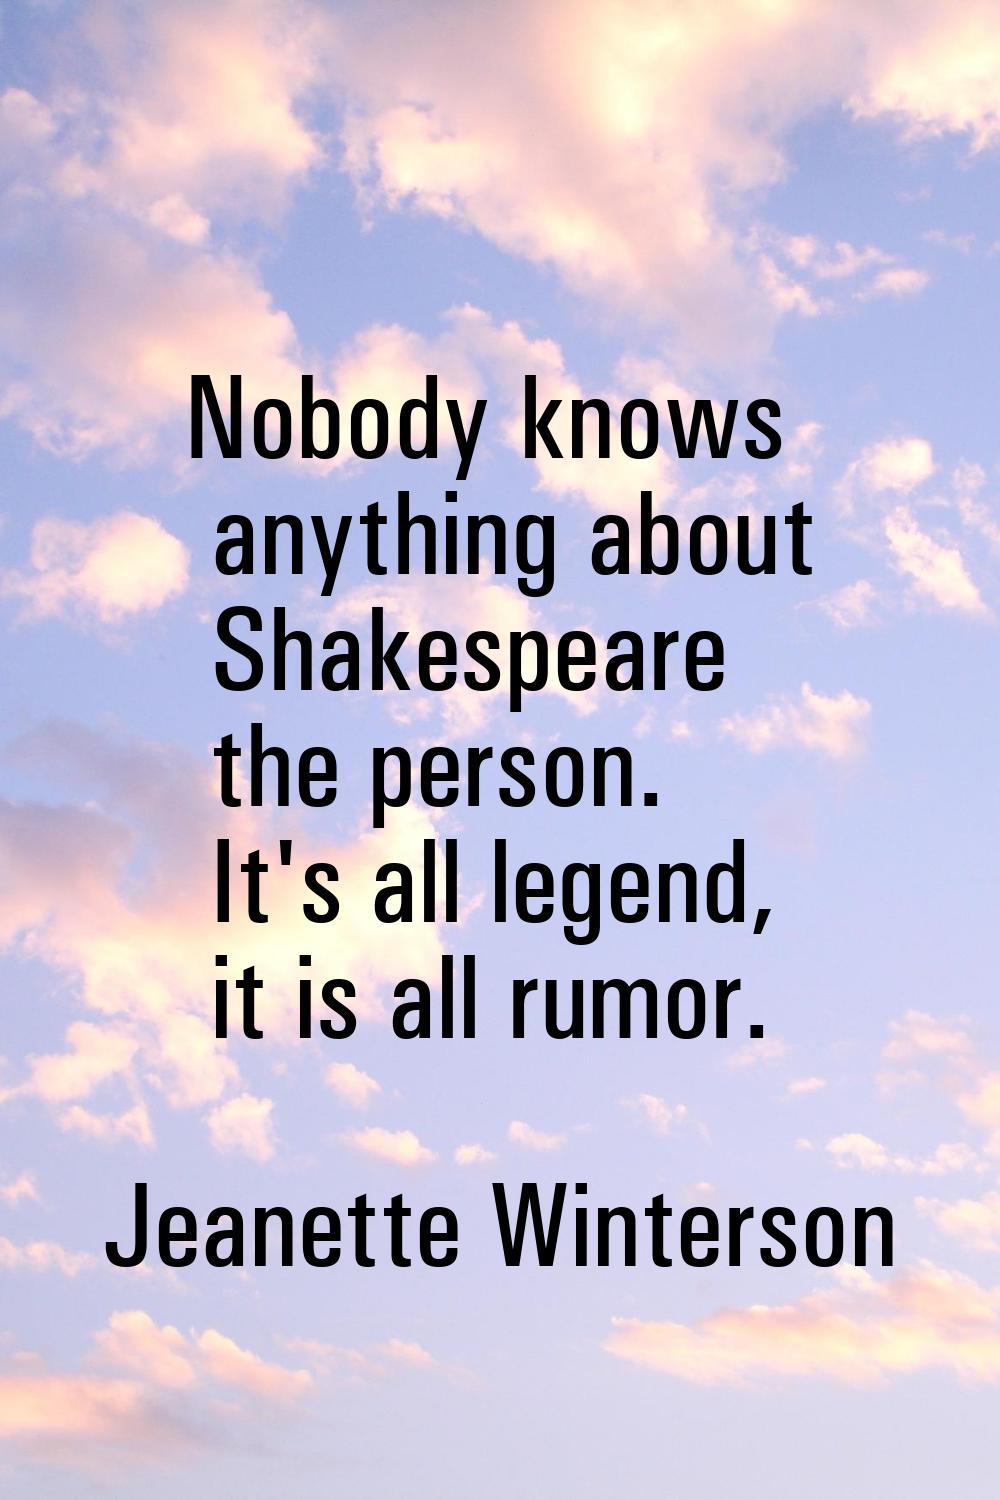 Nobody knows anything about Shakespeare the person. It's all legend, it is all rumor.